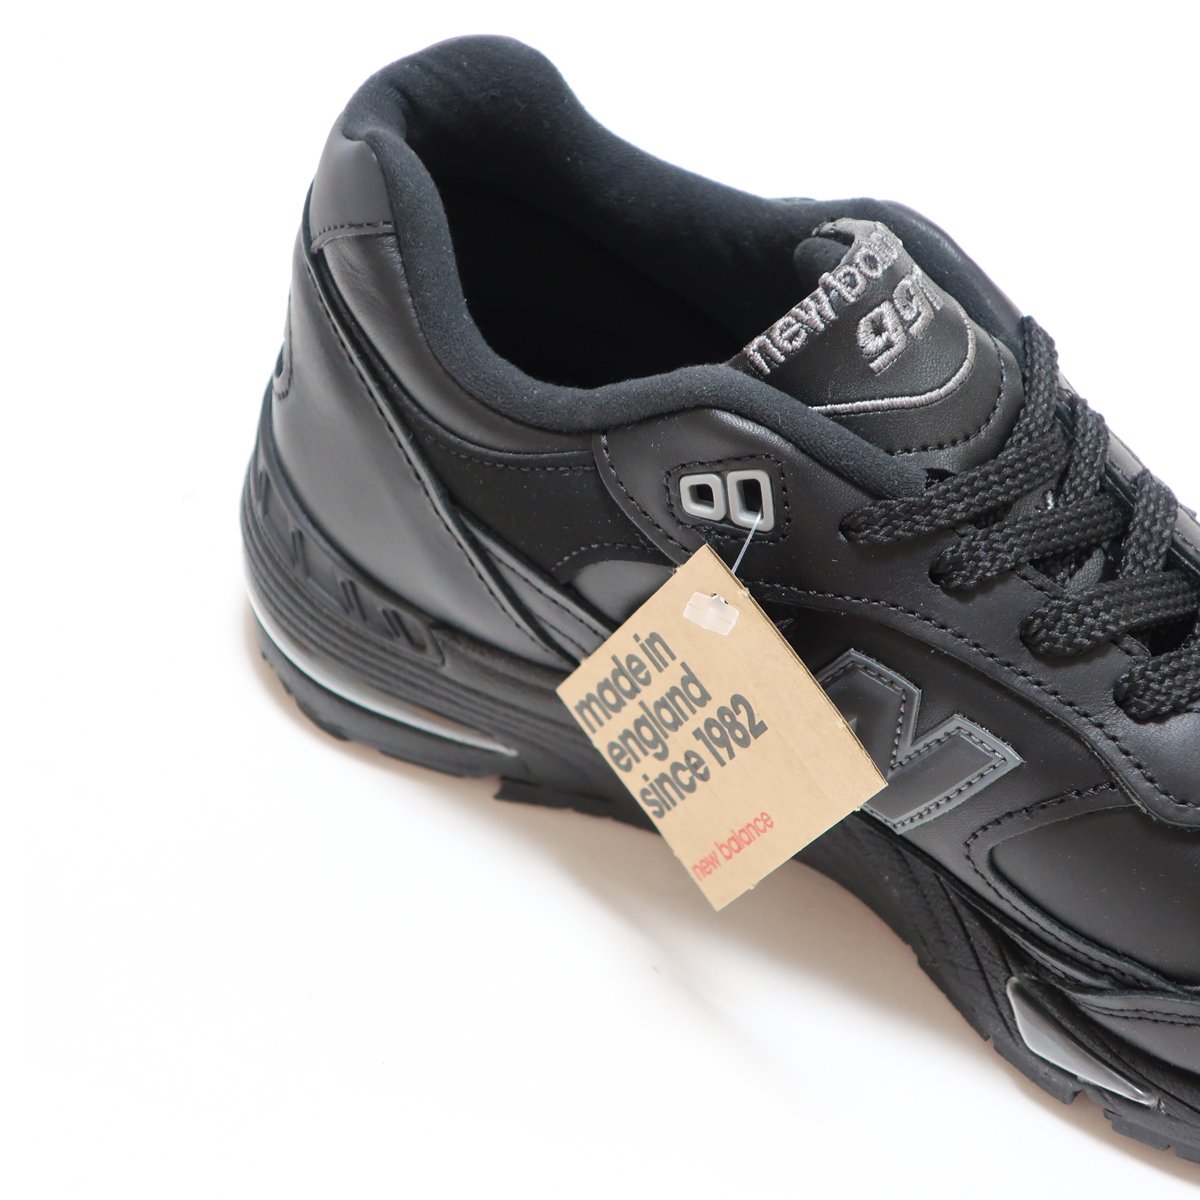 NEW BALANCE M991TK TRIPLE BLACK LEATHER MADE IN ENGLAND 